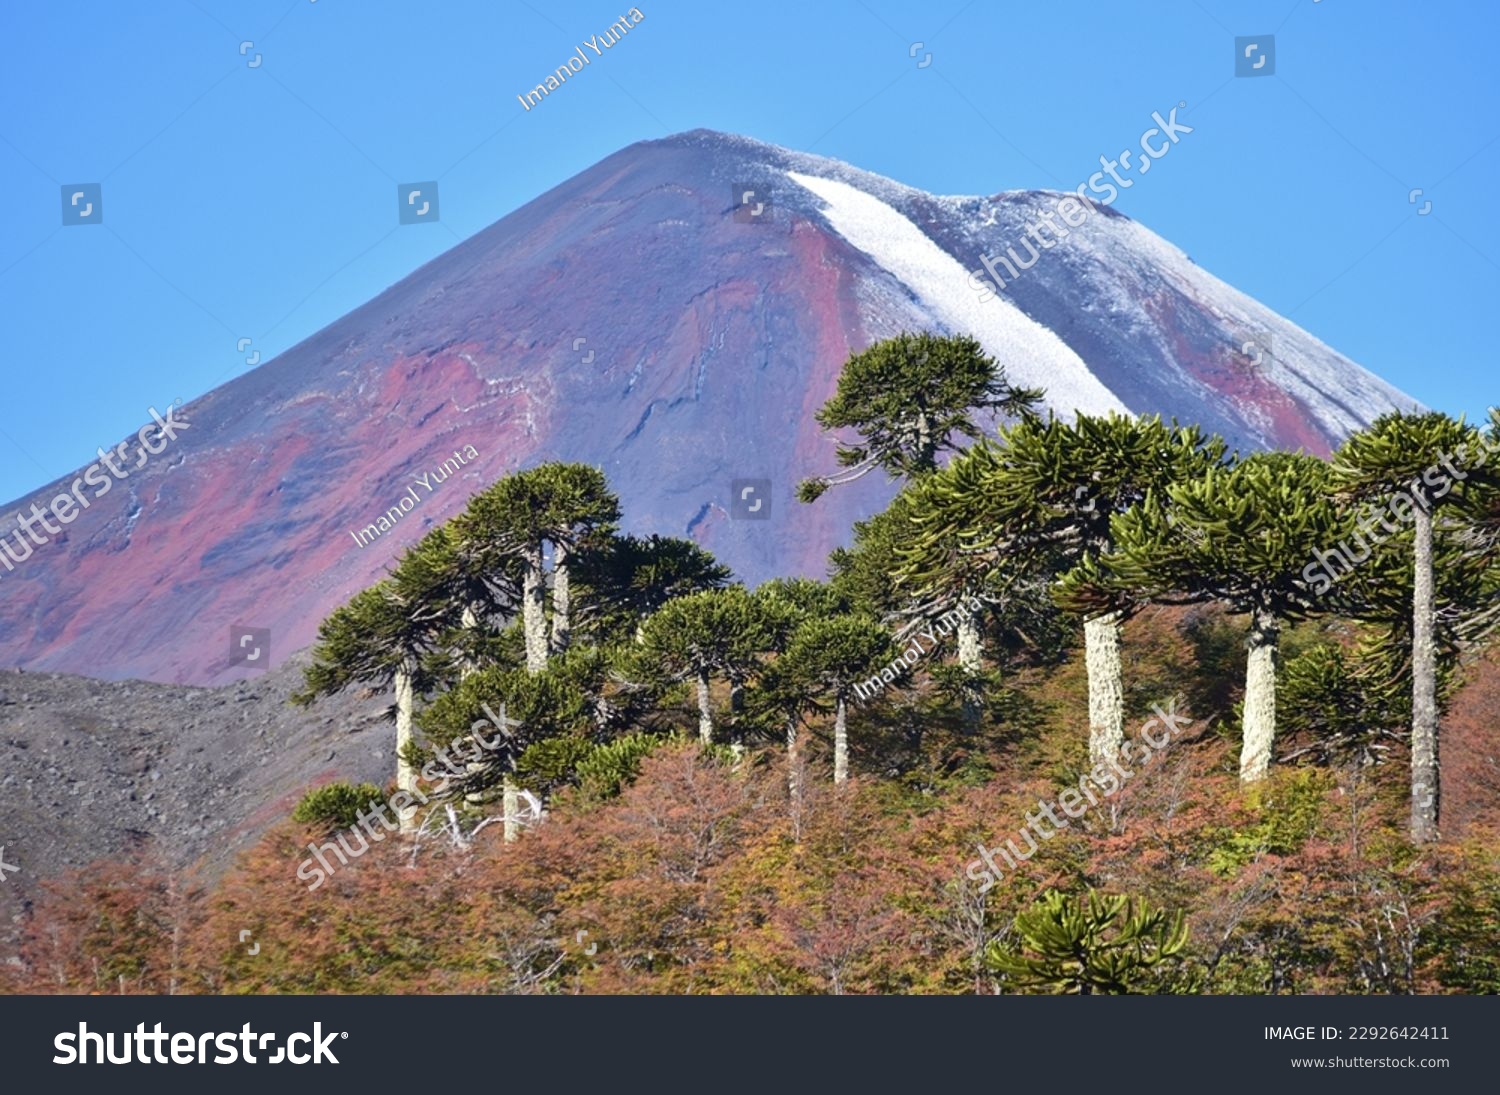 Autumn landscape in the Andean Araucania region of Chile with Araucaria trees and forest with typical autumn colors, all illuminated by the setting sun, with the imposing Llaima volcano in the back #2292642411